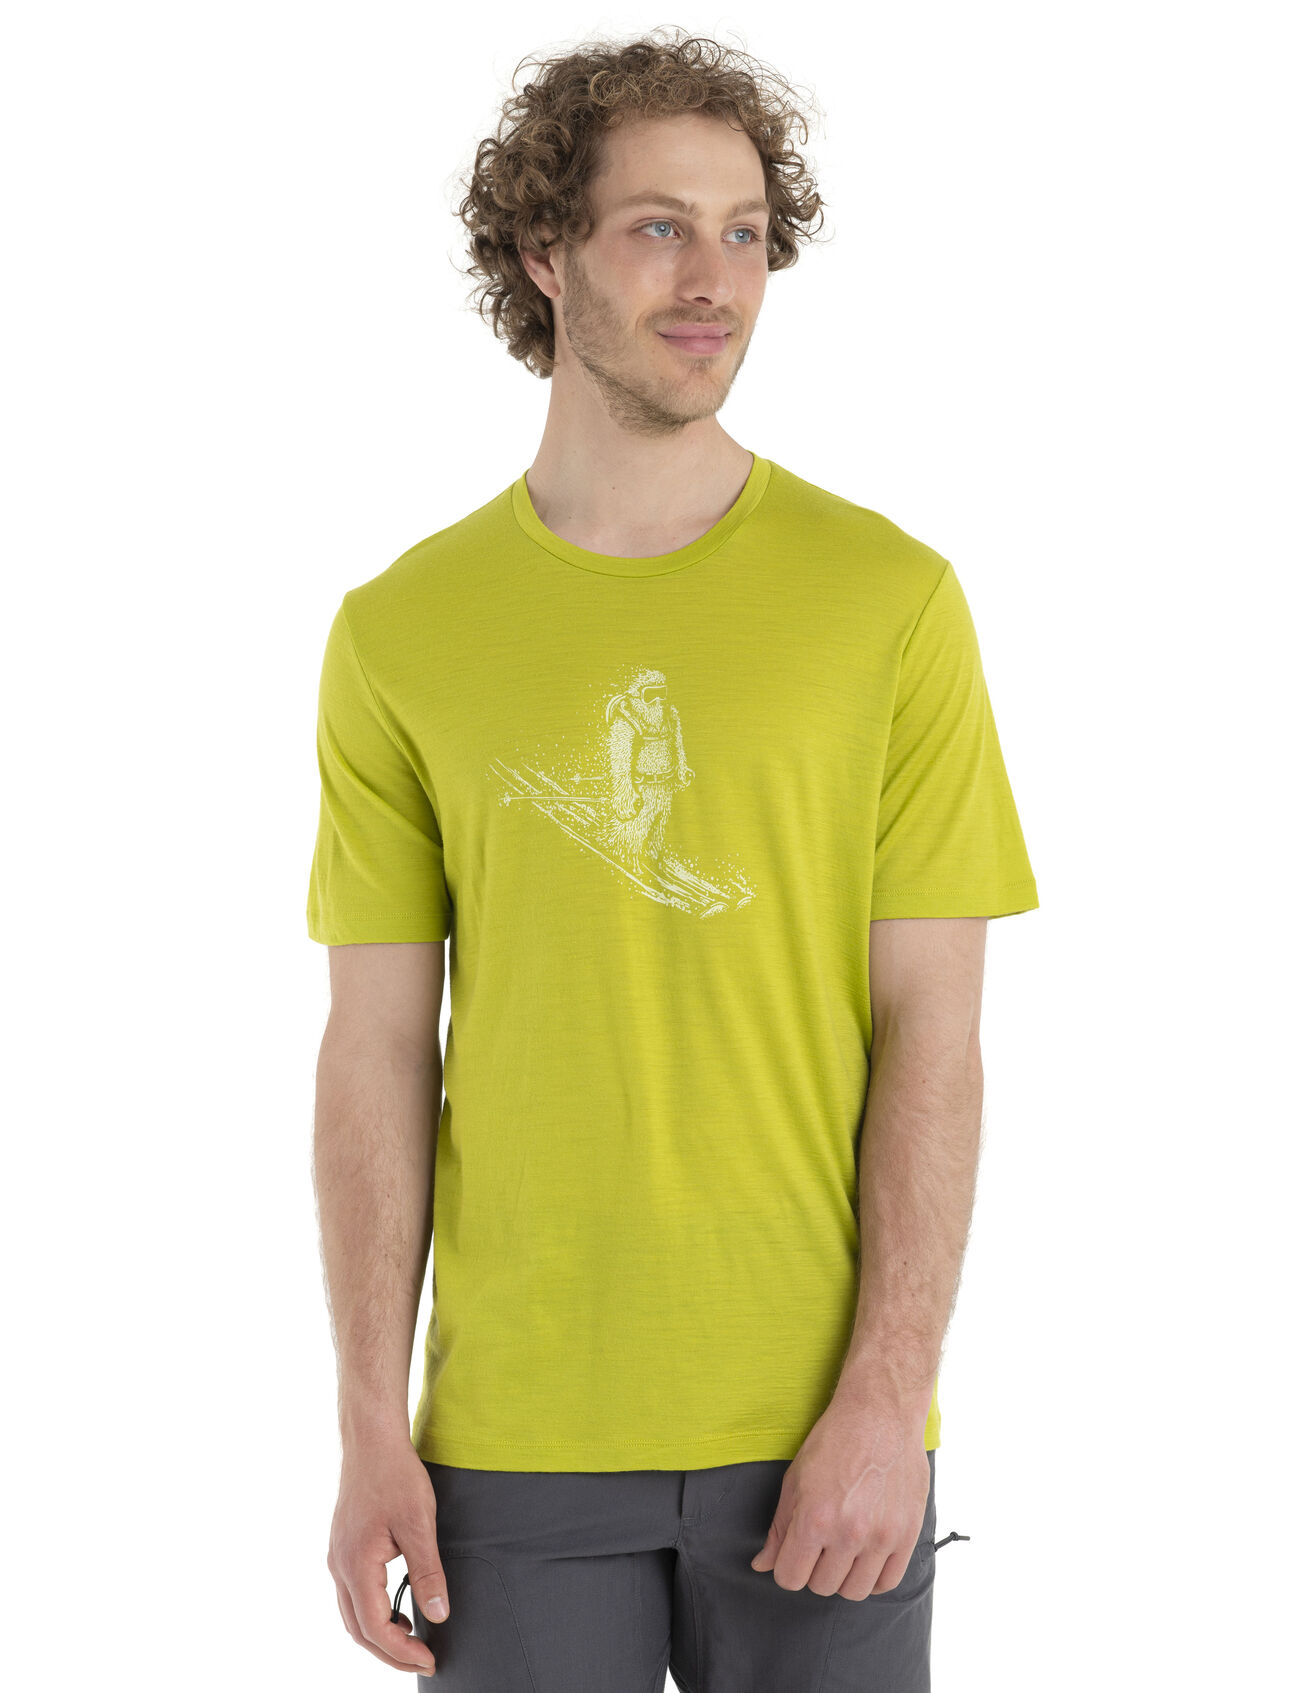 Mens Merino Tech Lite II Short Sleeve T-Shirt Skiing Yeti Our versatile tech tee that provides comfort, breathability and natural odor-resistance for any adventure you can think of, the Tech Lite II Short Sleeve Tee Skiing Yeti features 100% merino for all-natural performance. The original artwork by Damon Watters features a fun illustration of the ultimate mountain dweller enjoying some turns.